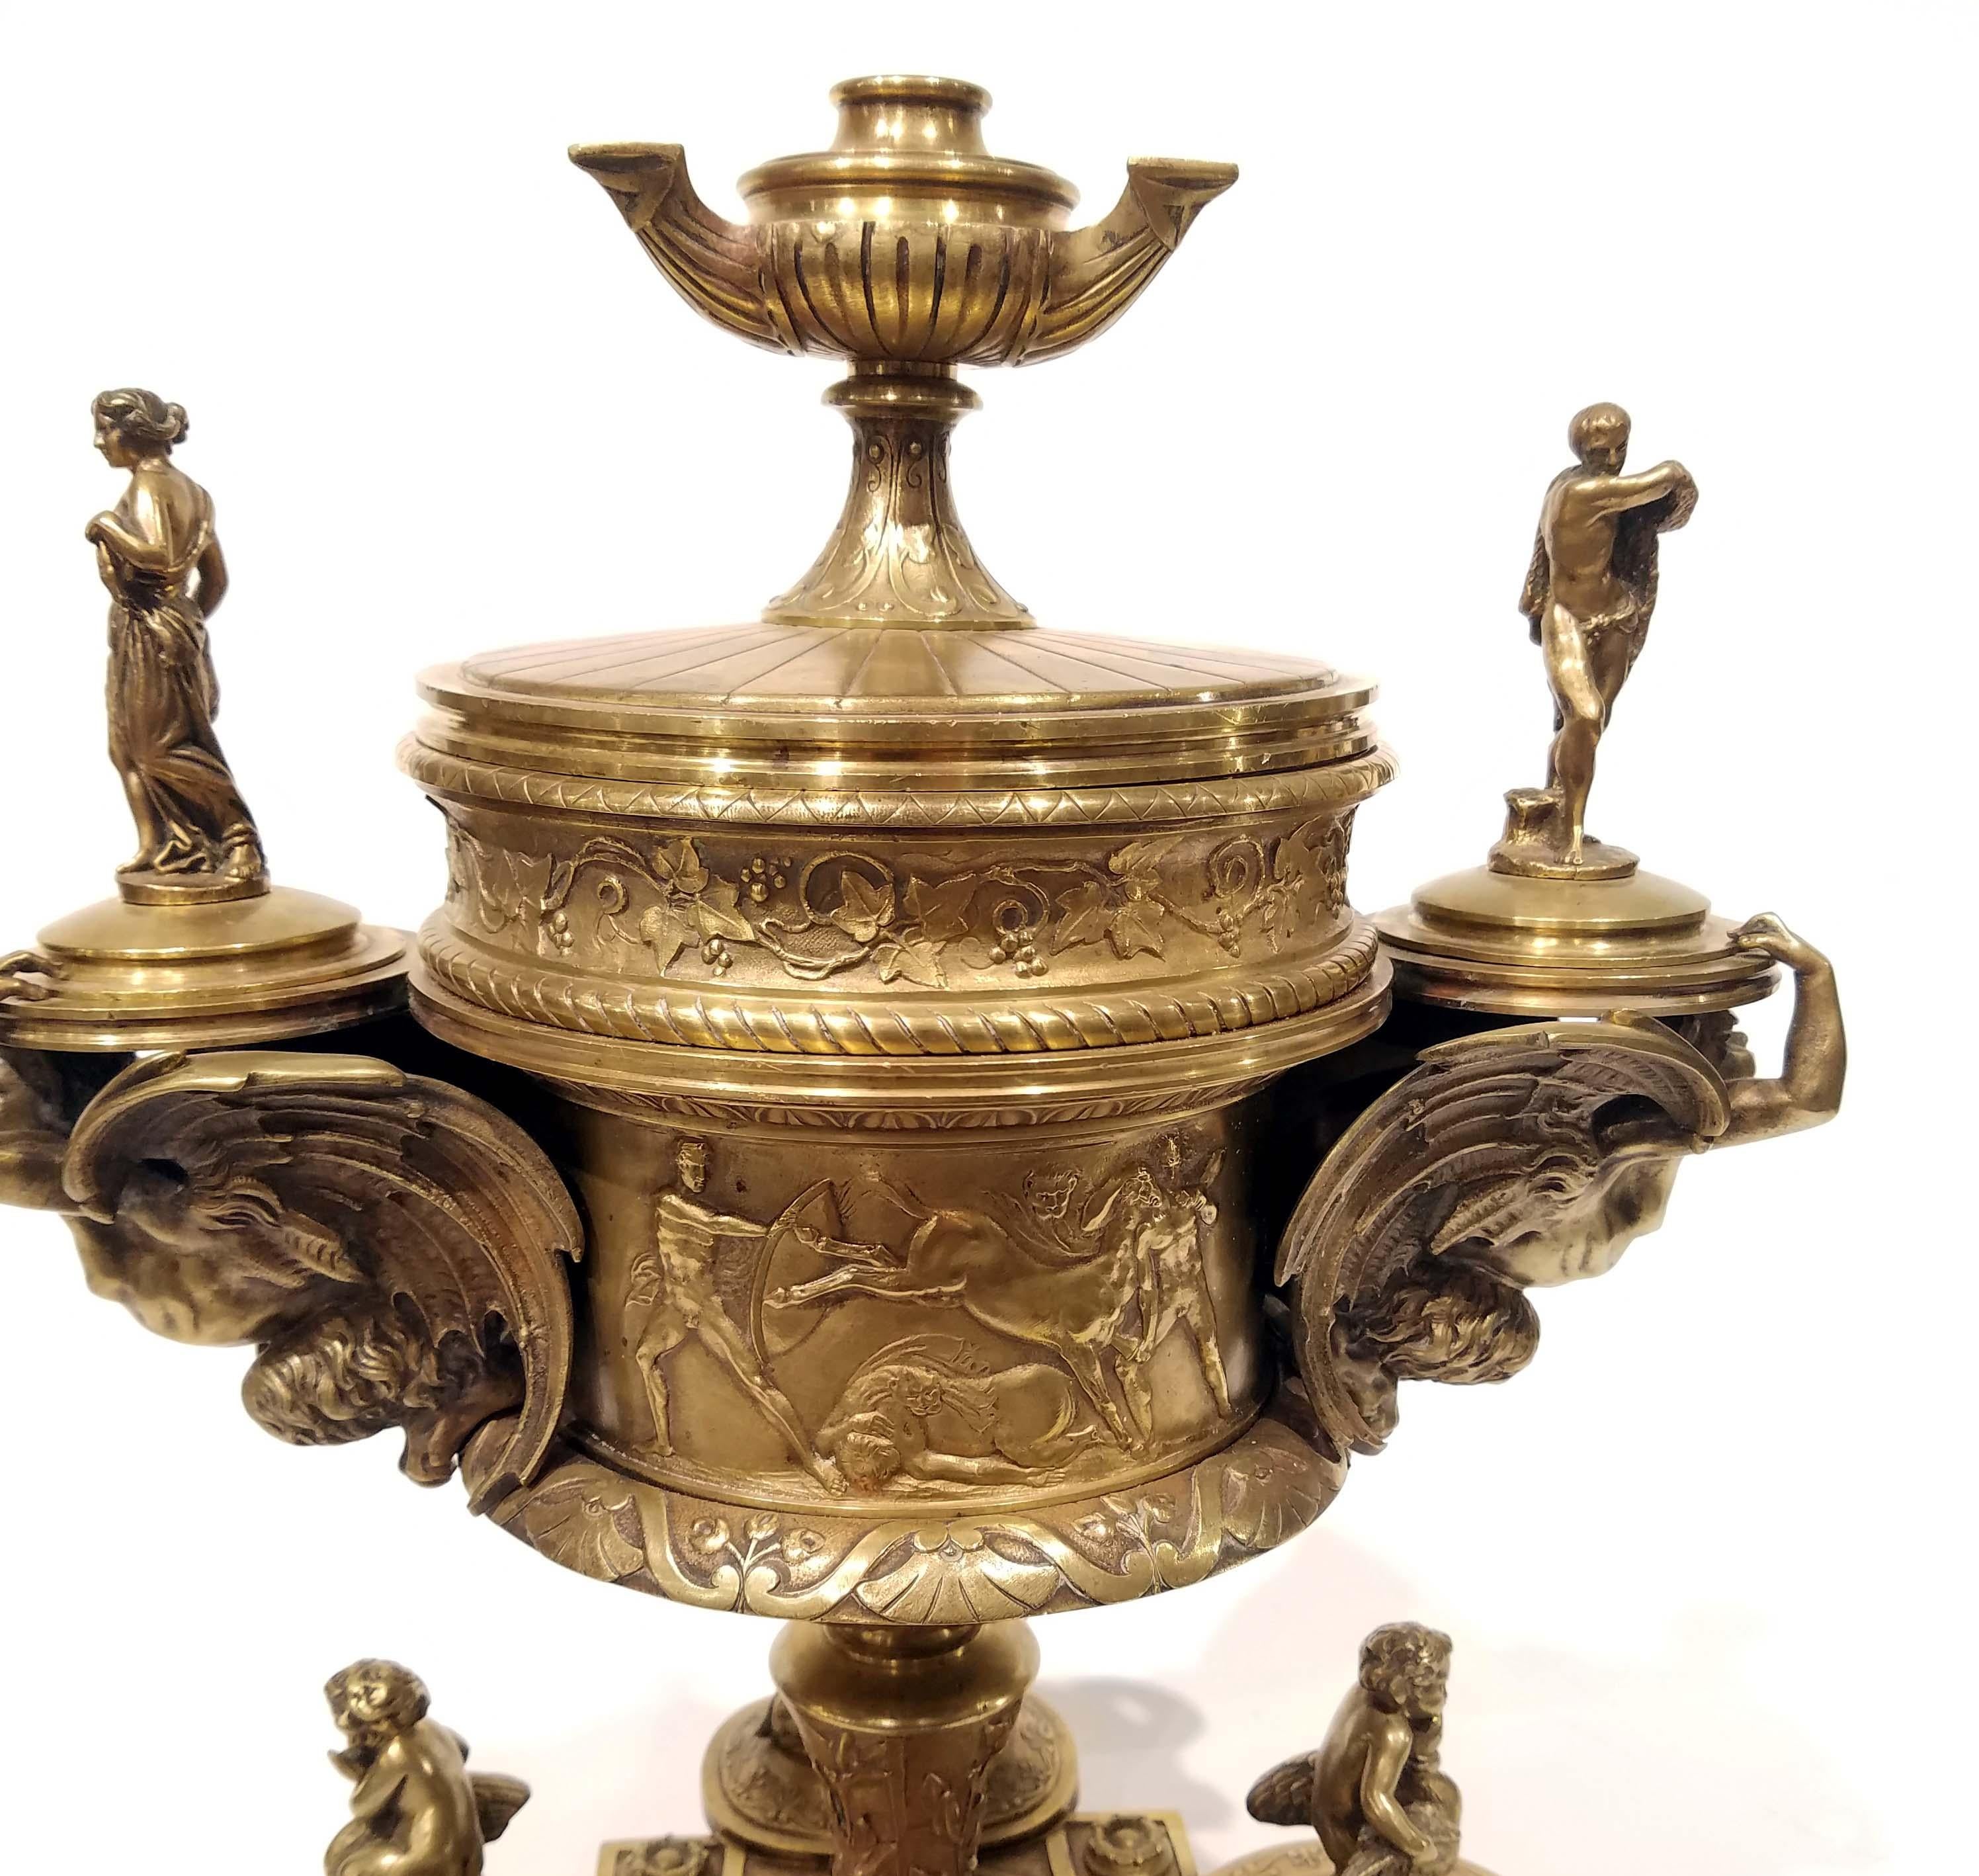 A rare Maison Alphonse Giroux cast bronze cigar container. Bronze cigar container in neoclassical motif circa late 19th century. Wonderful details with 2 winged devil figures flanking on either sides. 